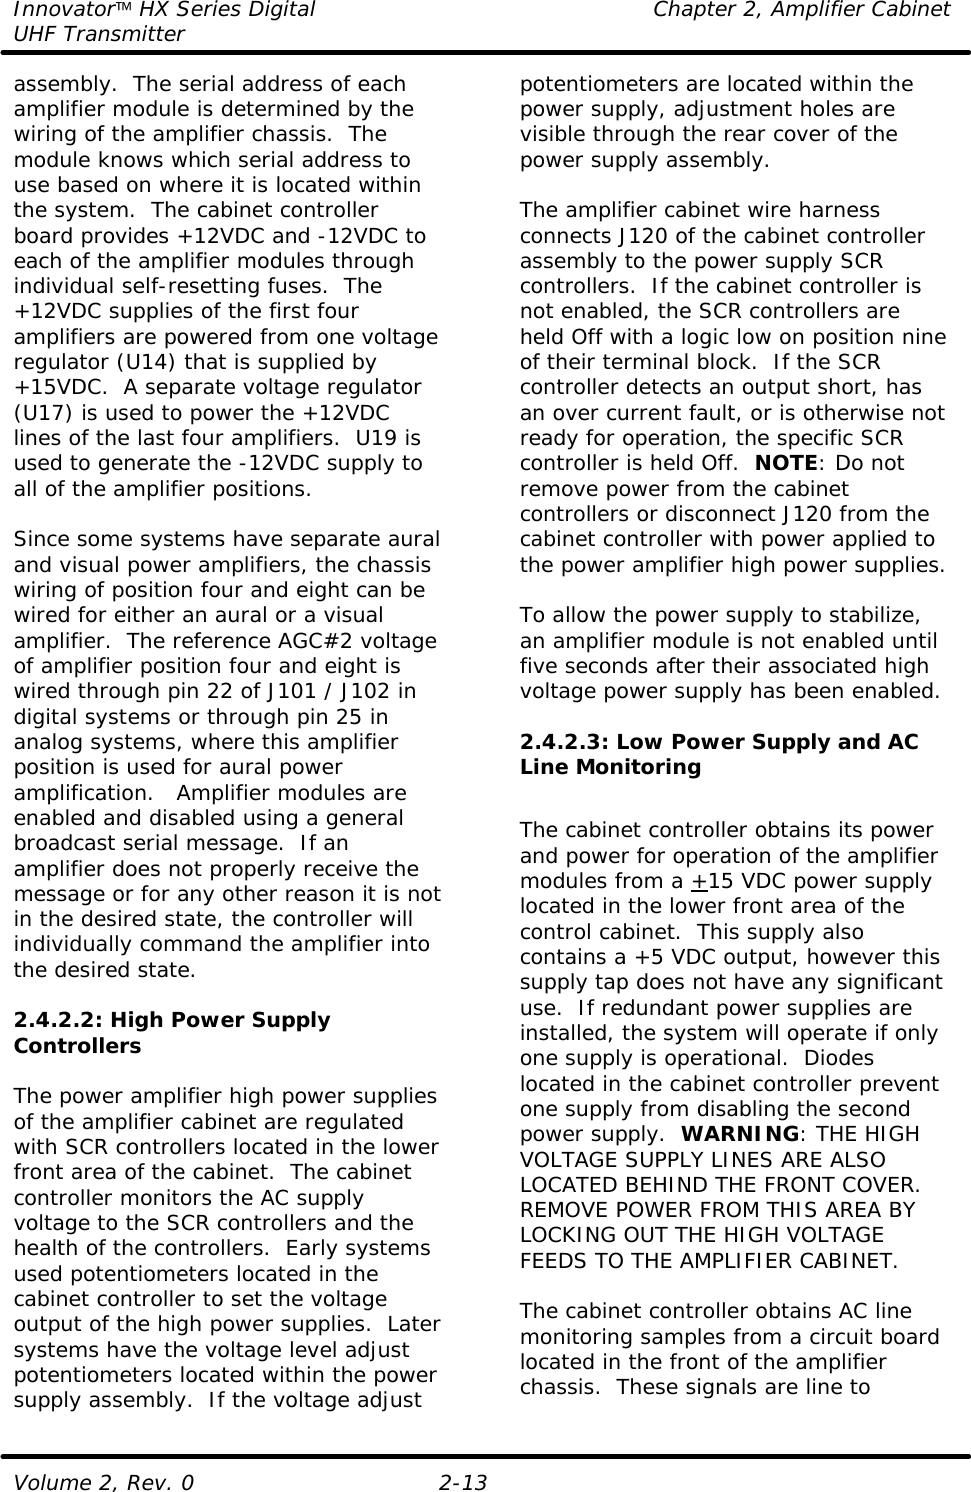 Innovator HX Series Digital Chapter 2, Amplifier Cabinet UHF Transmitter Volume 2, Rev. 0 2-13 assembly.  The serial address of each amplifier module is determined by the wiring of the amplifier chassis.  The module knows which serial address to use based on where it is located within the system.  The cabinet controller board provides +12VDC and -12VDC to each of the amplifier modules through individual self-resetting fuses.  The +12VDC supplies of the first four amplifiers are powered from one voltage regulator (U14) that is supplied by +15VDC.  A separate voltage regulator (U17) is used to power the +12VDC lines of the last four amplifiers.  U19 is used to generate the -12VDC supply to all of the amplifier positions.  Since some systems have separate aural and visual power amplifiers, the chassis wiring of position four and eight can be wired for either an aural or a visual amplifier.  The reference AGC#2 voltage of amplifier position four and eight is wired through pin 22 of J101 / J102 in digital systems or through pin 25 in analog systems, where this amplifier position is used for aural power amplification.   Amplifier modules are enabled and disabled using a general broadcast serial message.  If an amplifier does not properly receive the message or for any other reason it is not in the desired state, the controller will individually command the amplifier into the desired state.   2.4.2.2: High Power Supply Controllers  The power amplifier high power supplies of the amplifier cabinet are regulated with SCR controllers located in the lower front area of the cabinet.  The cabinet controller monitors the AC supply voltage to the SCR controllers and the health of the controllers.  Early systems used potentiometers located in the cabinet controller to set the voltage output of the high power supplies.  Later systems have the voltage level adjust potentiometers located within the power supply assembly.  If the voltage adjust potentiometers are located within the power supply, adjustment holes are visible through the rear cover of the power supply assembly.  The amplifier cabinet wire harness connects J120 of the cabinet controller assembly to the power supply SCR controllers.  If the cabinet controller is not enabled, the SCR controllers are held Off with a logic low on position nine of their terminal block.  If the SCR controller detects an output short, has an over current fault, or is otherwise not ready for operation, the specific SCR controller is held Off.  NOTE: Do not remove power from the cabinet controllers or disconnect J120 from the cabinet controller with power applied to the power amplifier high power supplies.    To allow the power supply to stabilize, an amplifier module is not enabled until five seconds after their associated high voltage power supply has been enabled.  2.4.2.3: Low Power Supply and AC Line Monitoring  The cabinet controller obtains its power and power for operation of the amplifier modules from a +15 VDC power supply located in the lower front area of the control cabinet.  This supply also contains a +5 VDC output, however this supply tap does not have any significant use.  If redundant power supplies are installed, the system will operate if only one supply is operational.  Diodes located in the cabinet controller prevent one supply from disabling the second power supply.  WARNING: THE HIGH VOLTAGE SUPPLY LINES ARE ALSO LOCATED BEHIND THE FRONT COVER.  REMOVE POWER FROM THIS AREA BY LOCKING OUT THE HIGH VOLTAGE FEEDS TO THE AMPLIFIER CABINET.  The cabinet controller obtains AC line monitoring samples from a circuit board located in the front of the amplifier chassis.  These signals are line to 